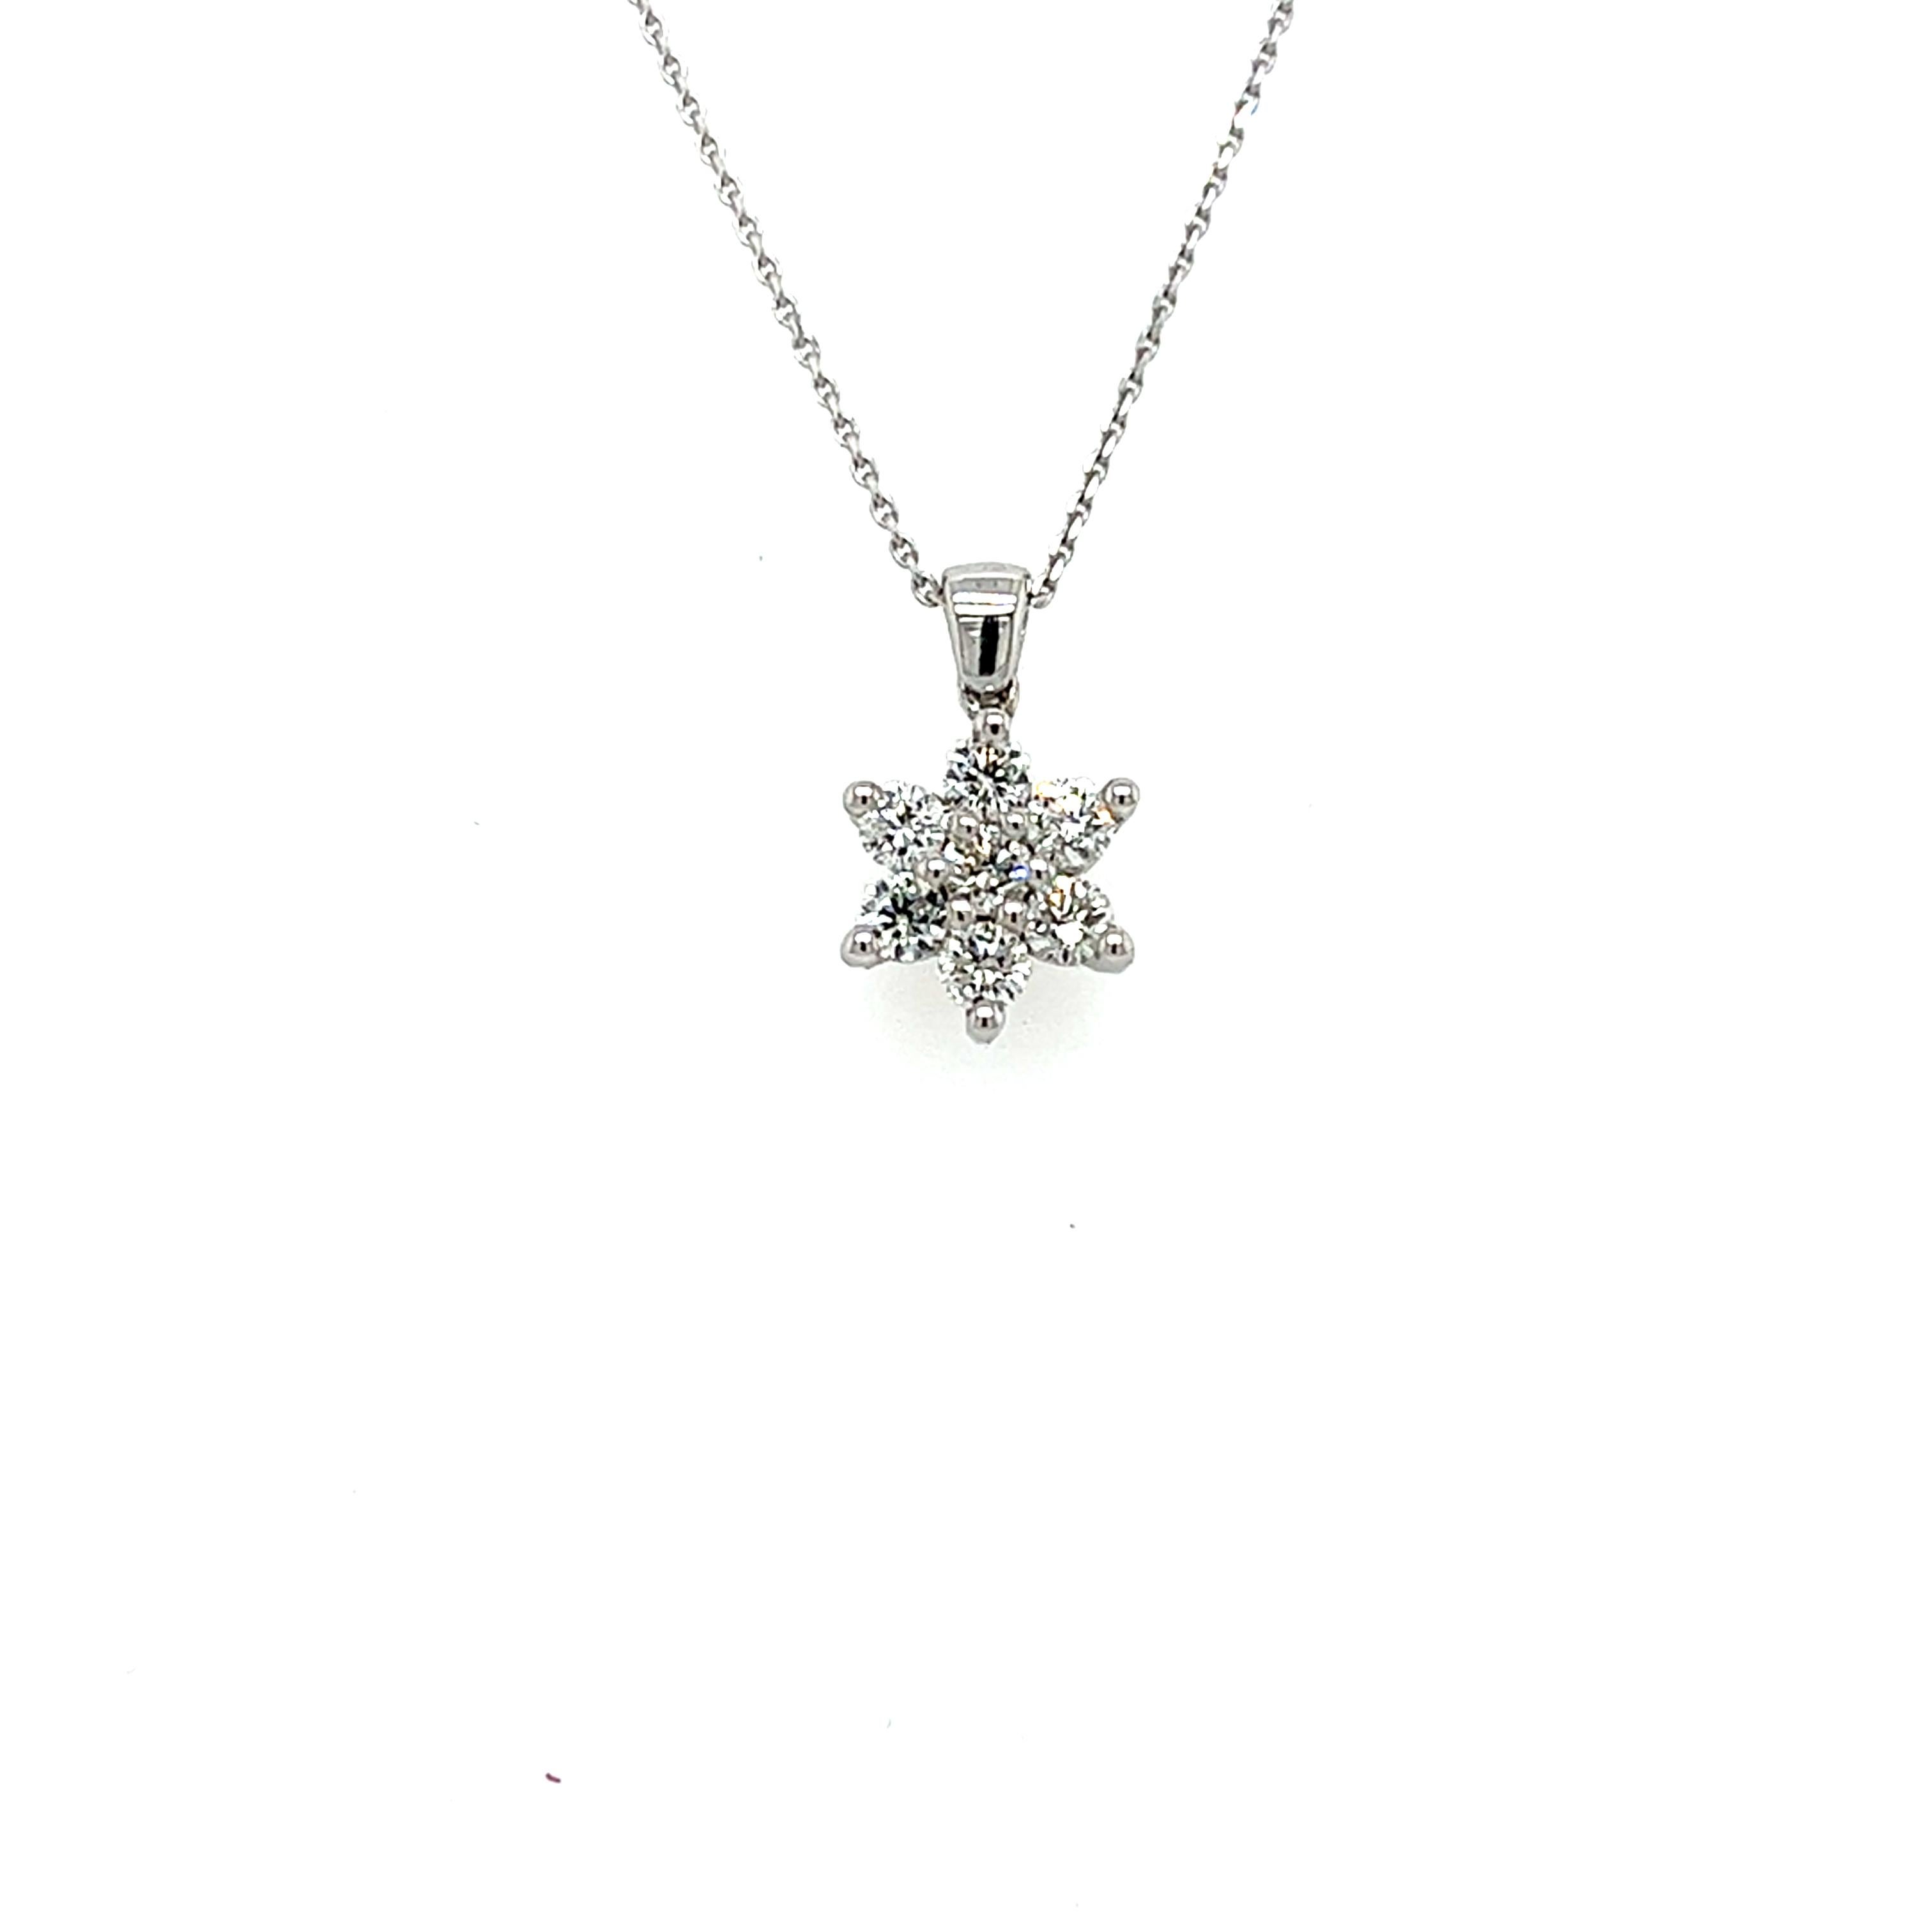 Brilliant Cut Flower Shaped Diamond Necklace 0.31 Cts Mounted on 18Kt White Gold